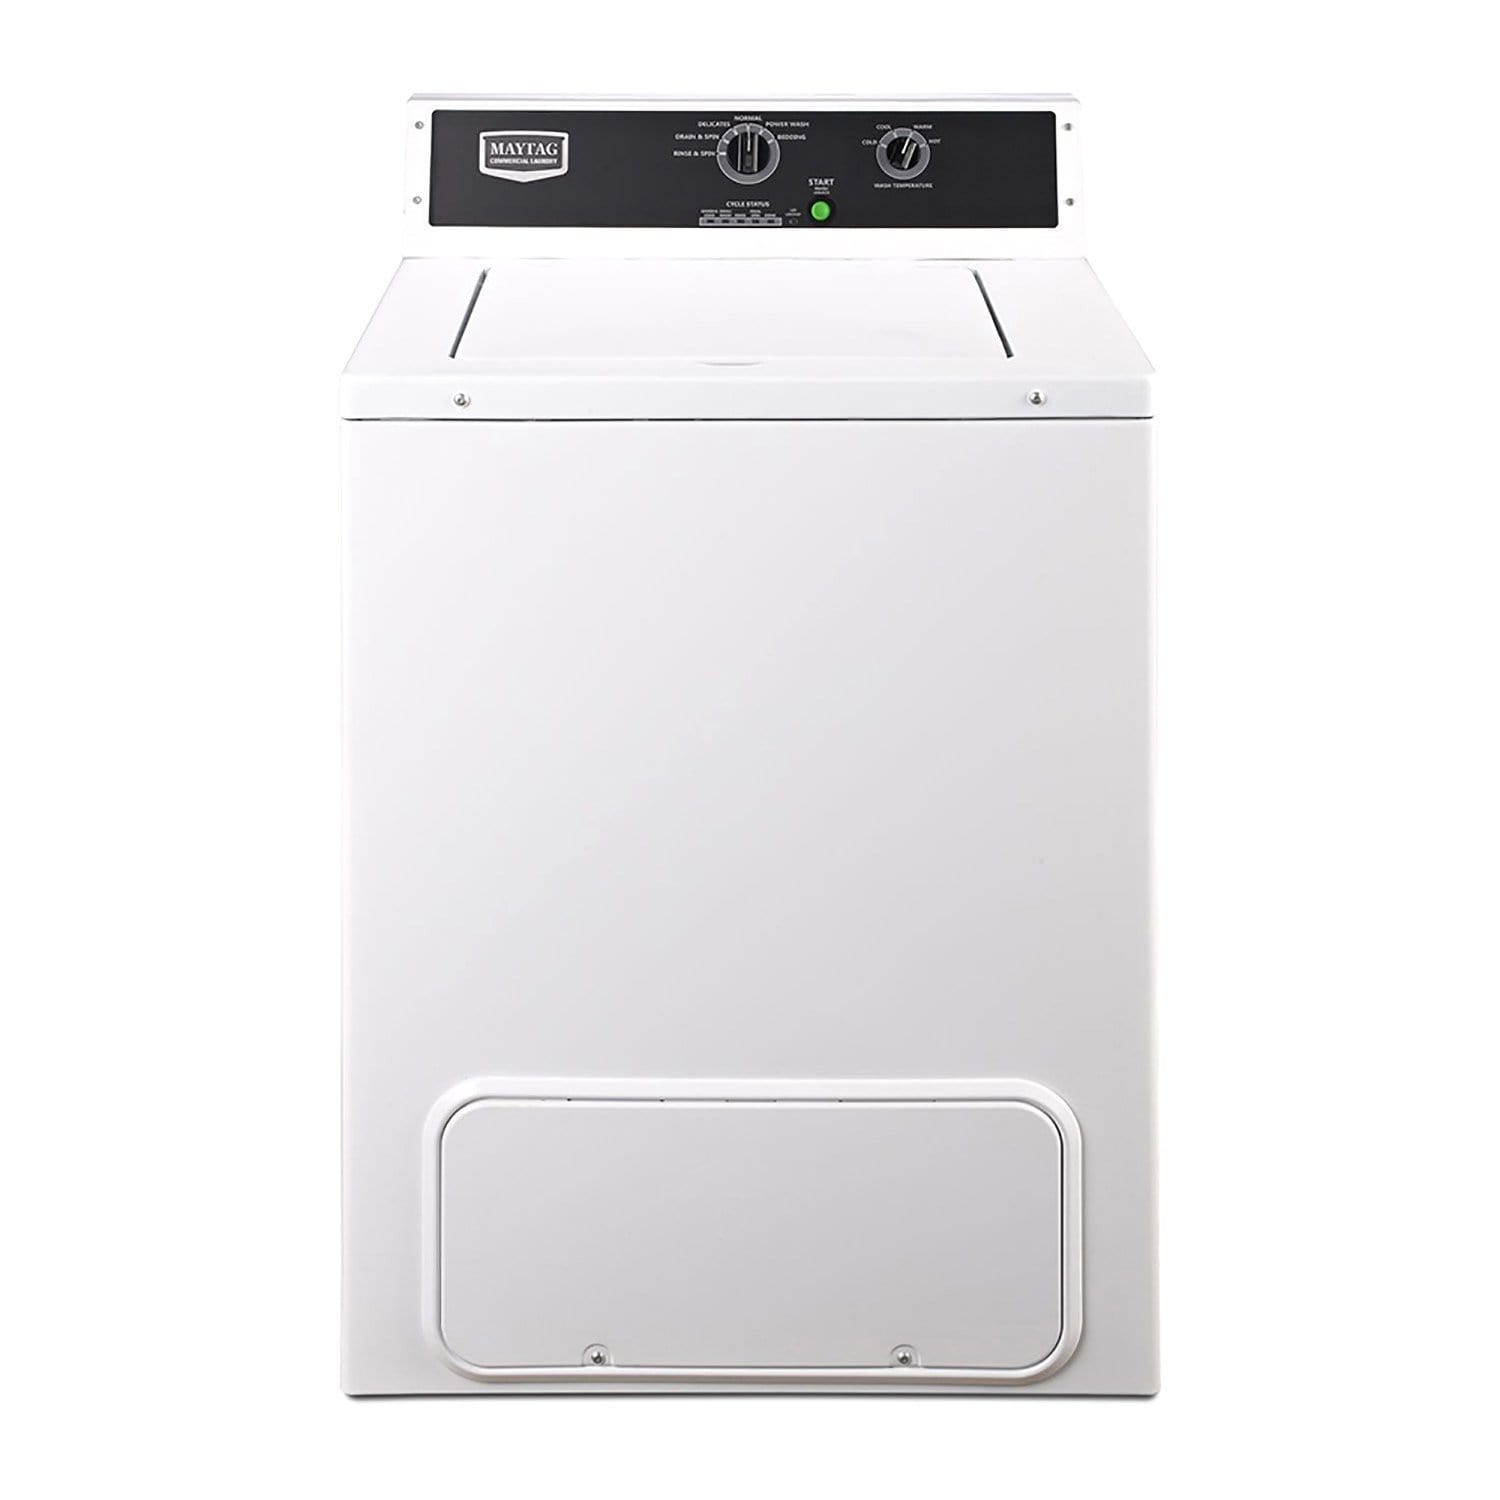 Maytag Heavy Duty Top Load Washer - White - MVW18MNBGW - Jashanmal Home